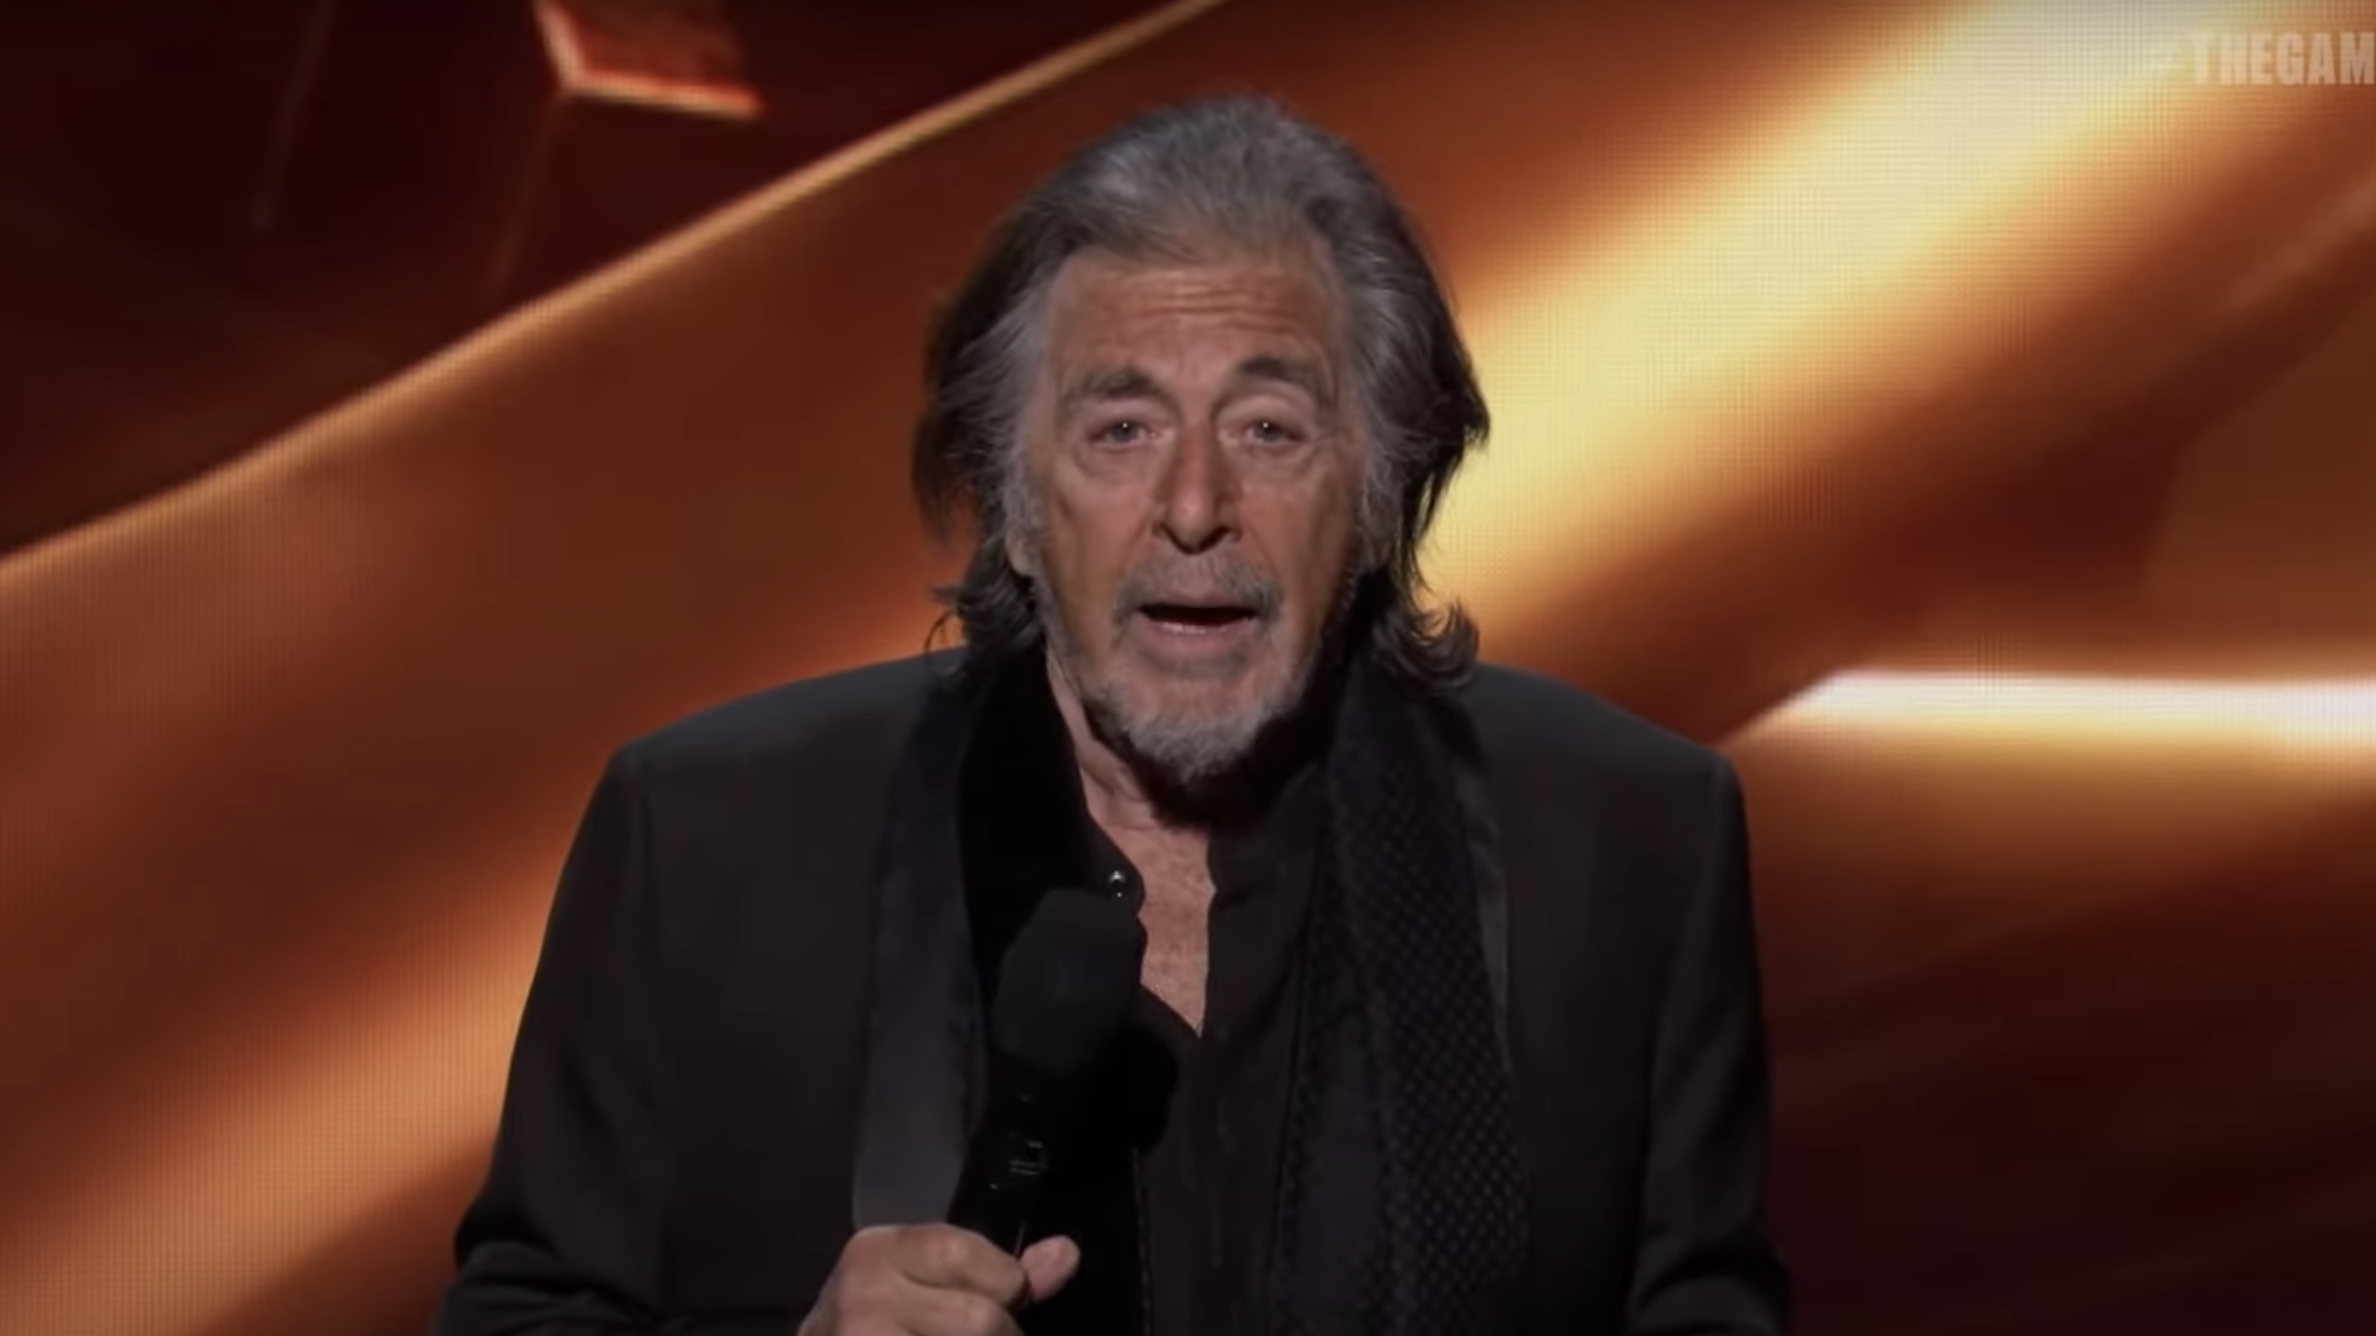 Al Pacino Inexplicably Arrives at The Game Awards 2022